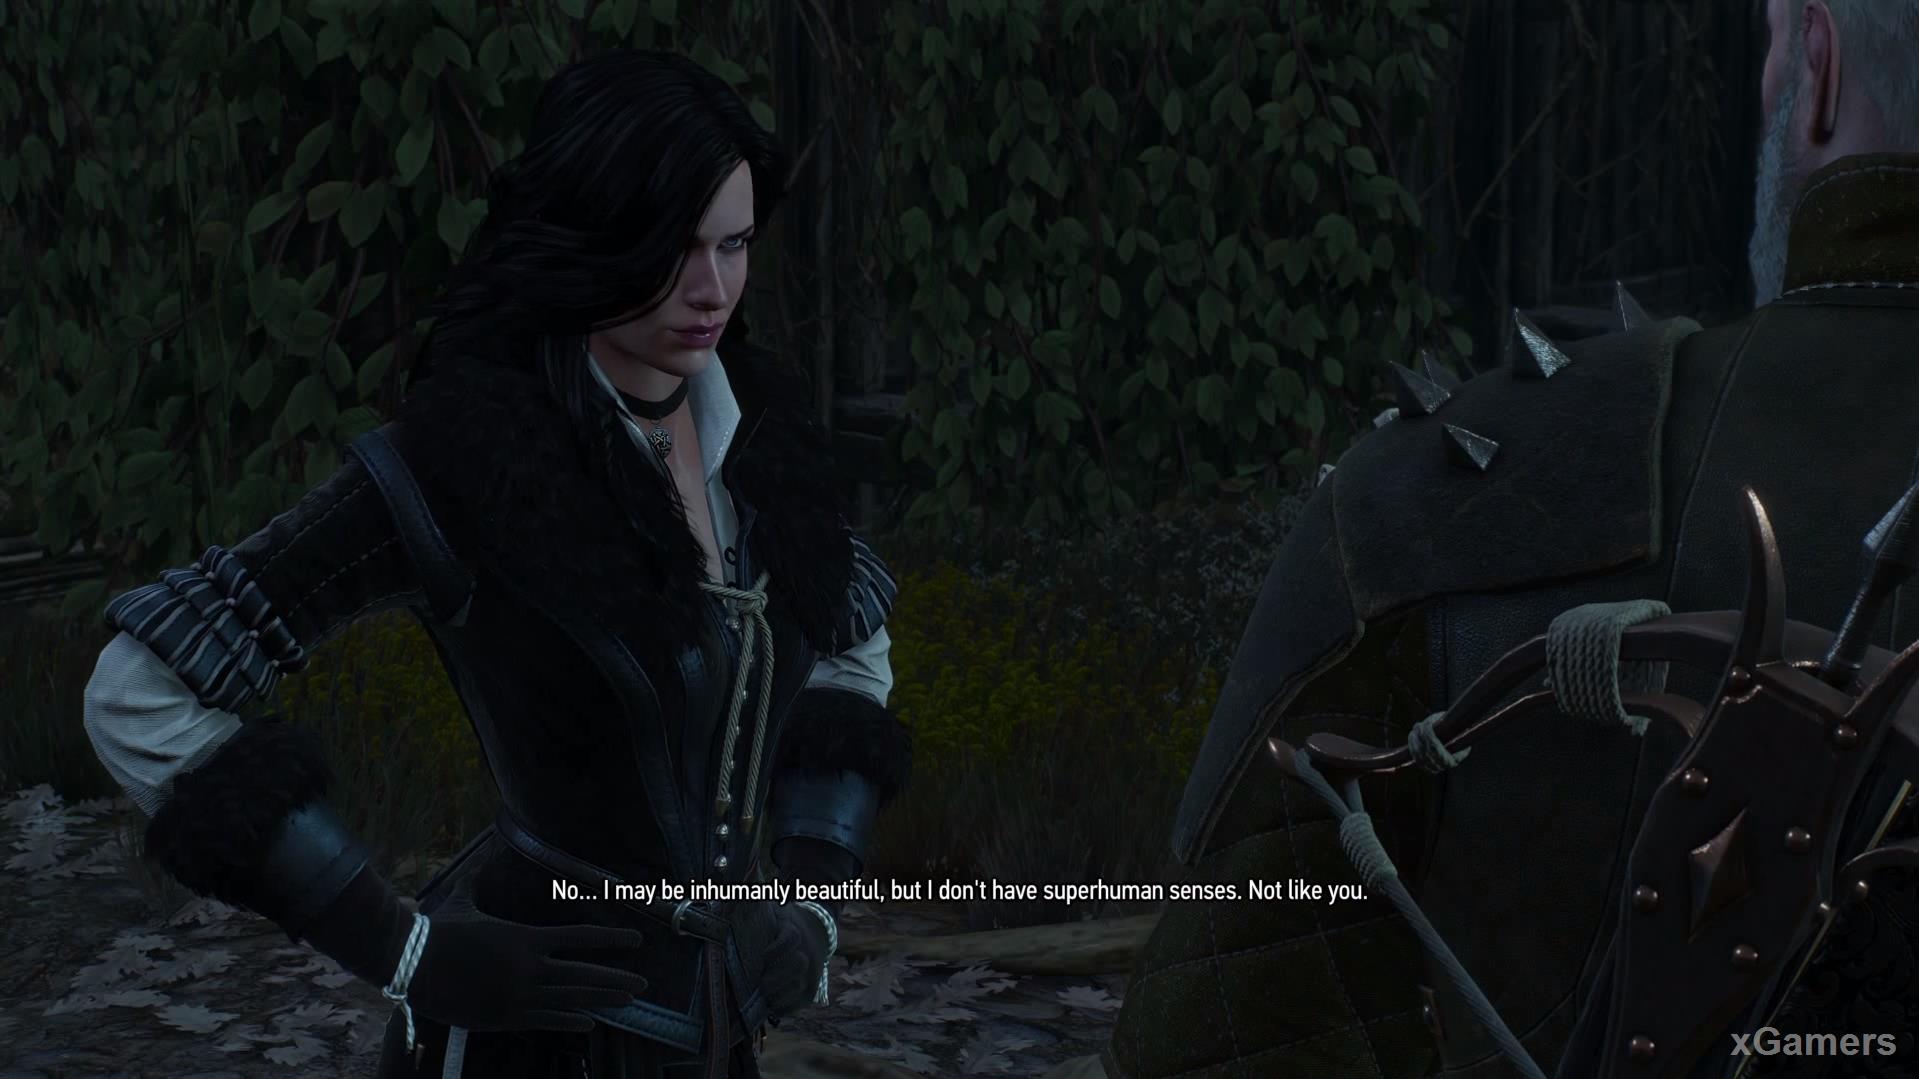 A conversation will begin with Yennefer, in which She will tell the information known to her